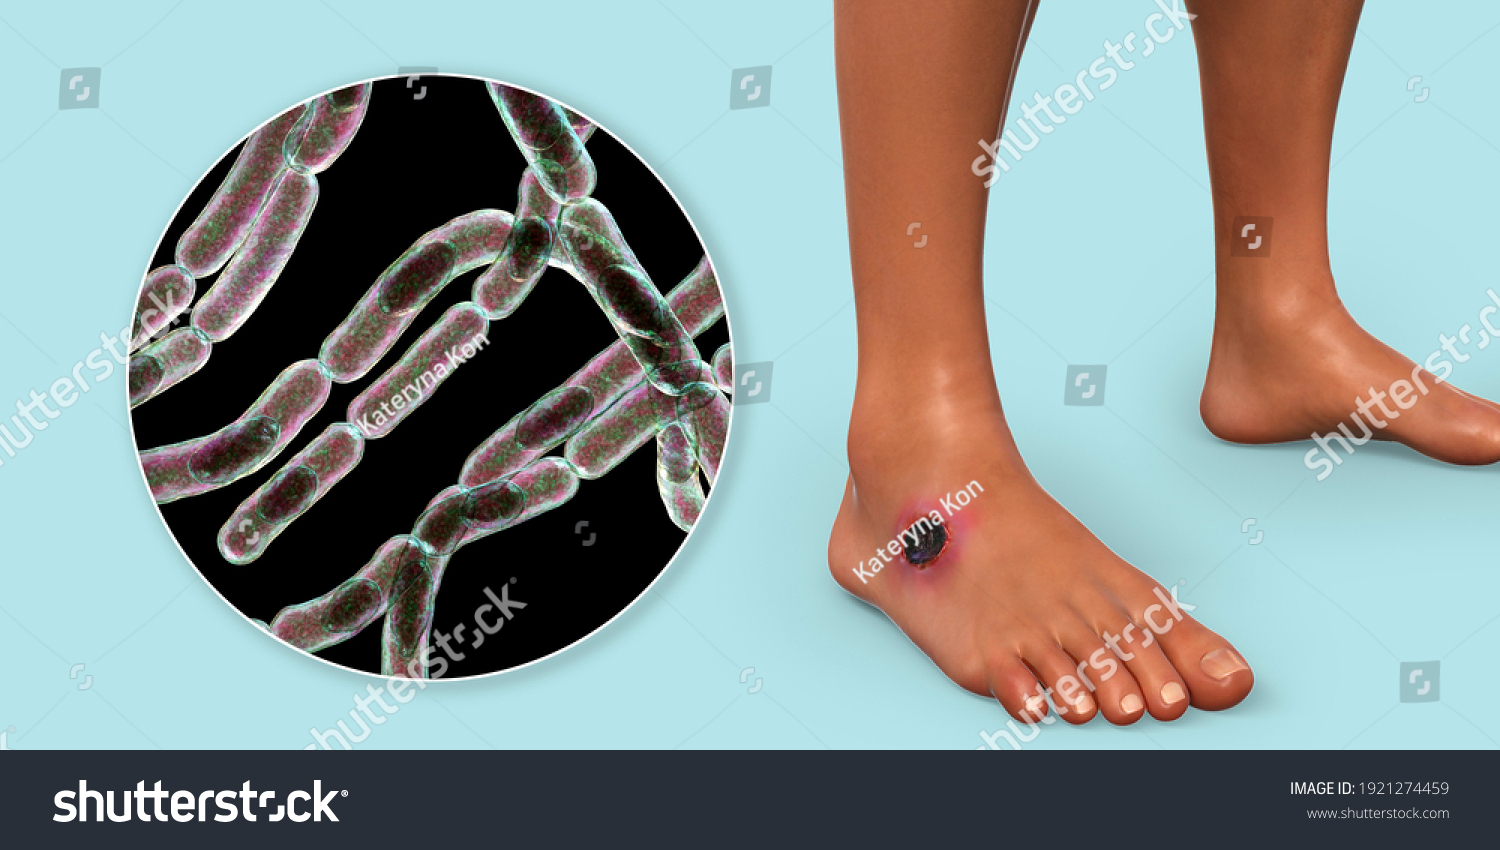 Cutaneous Anthrax Most Common Form Anthrax Stock Illustration 1921274459 Shutterstock 4179